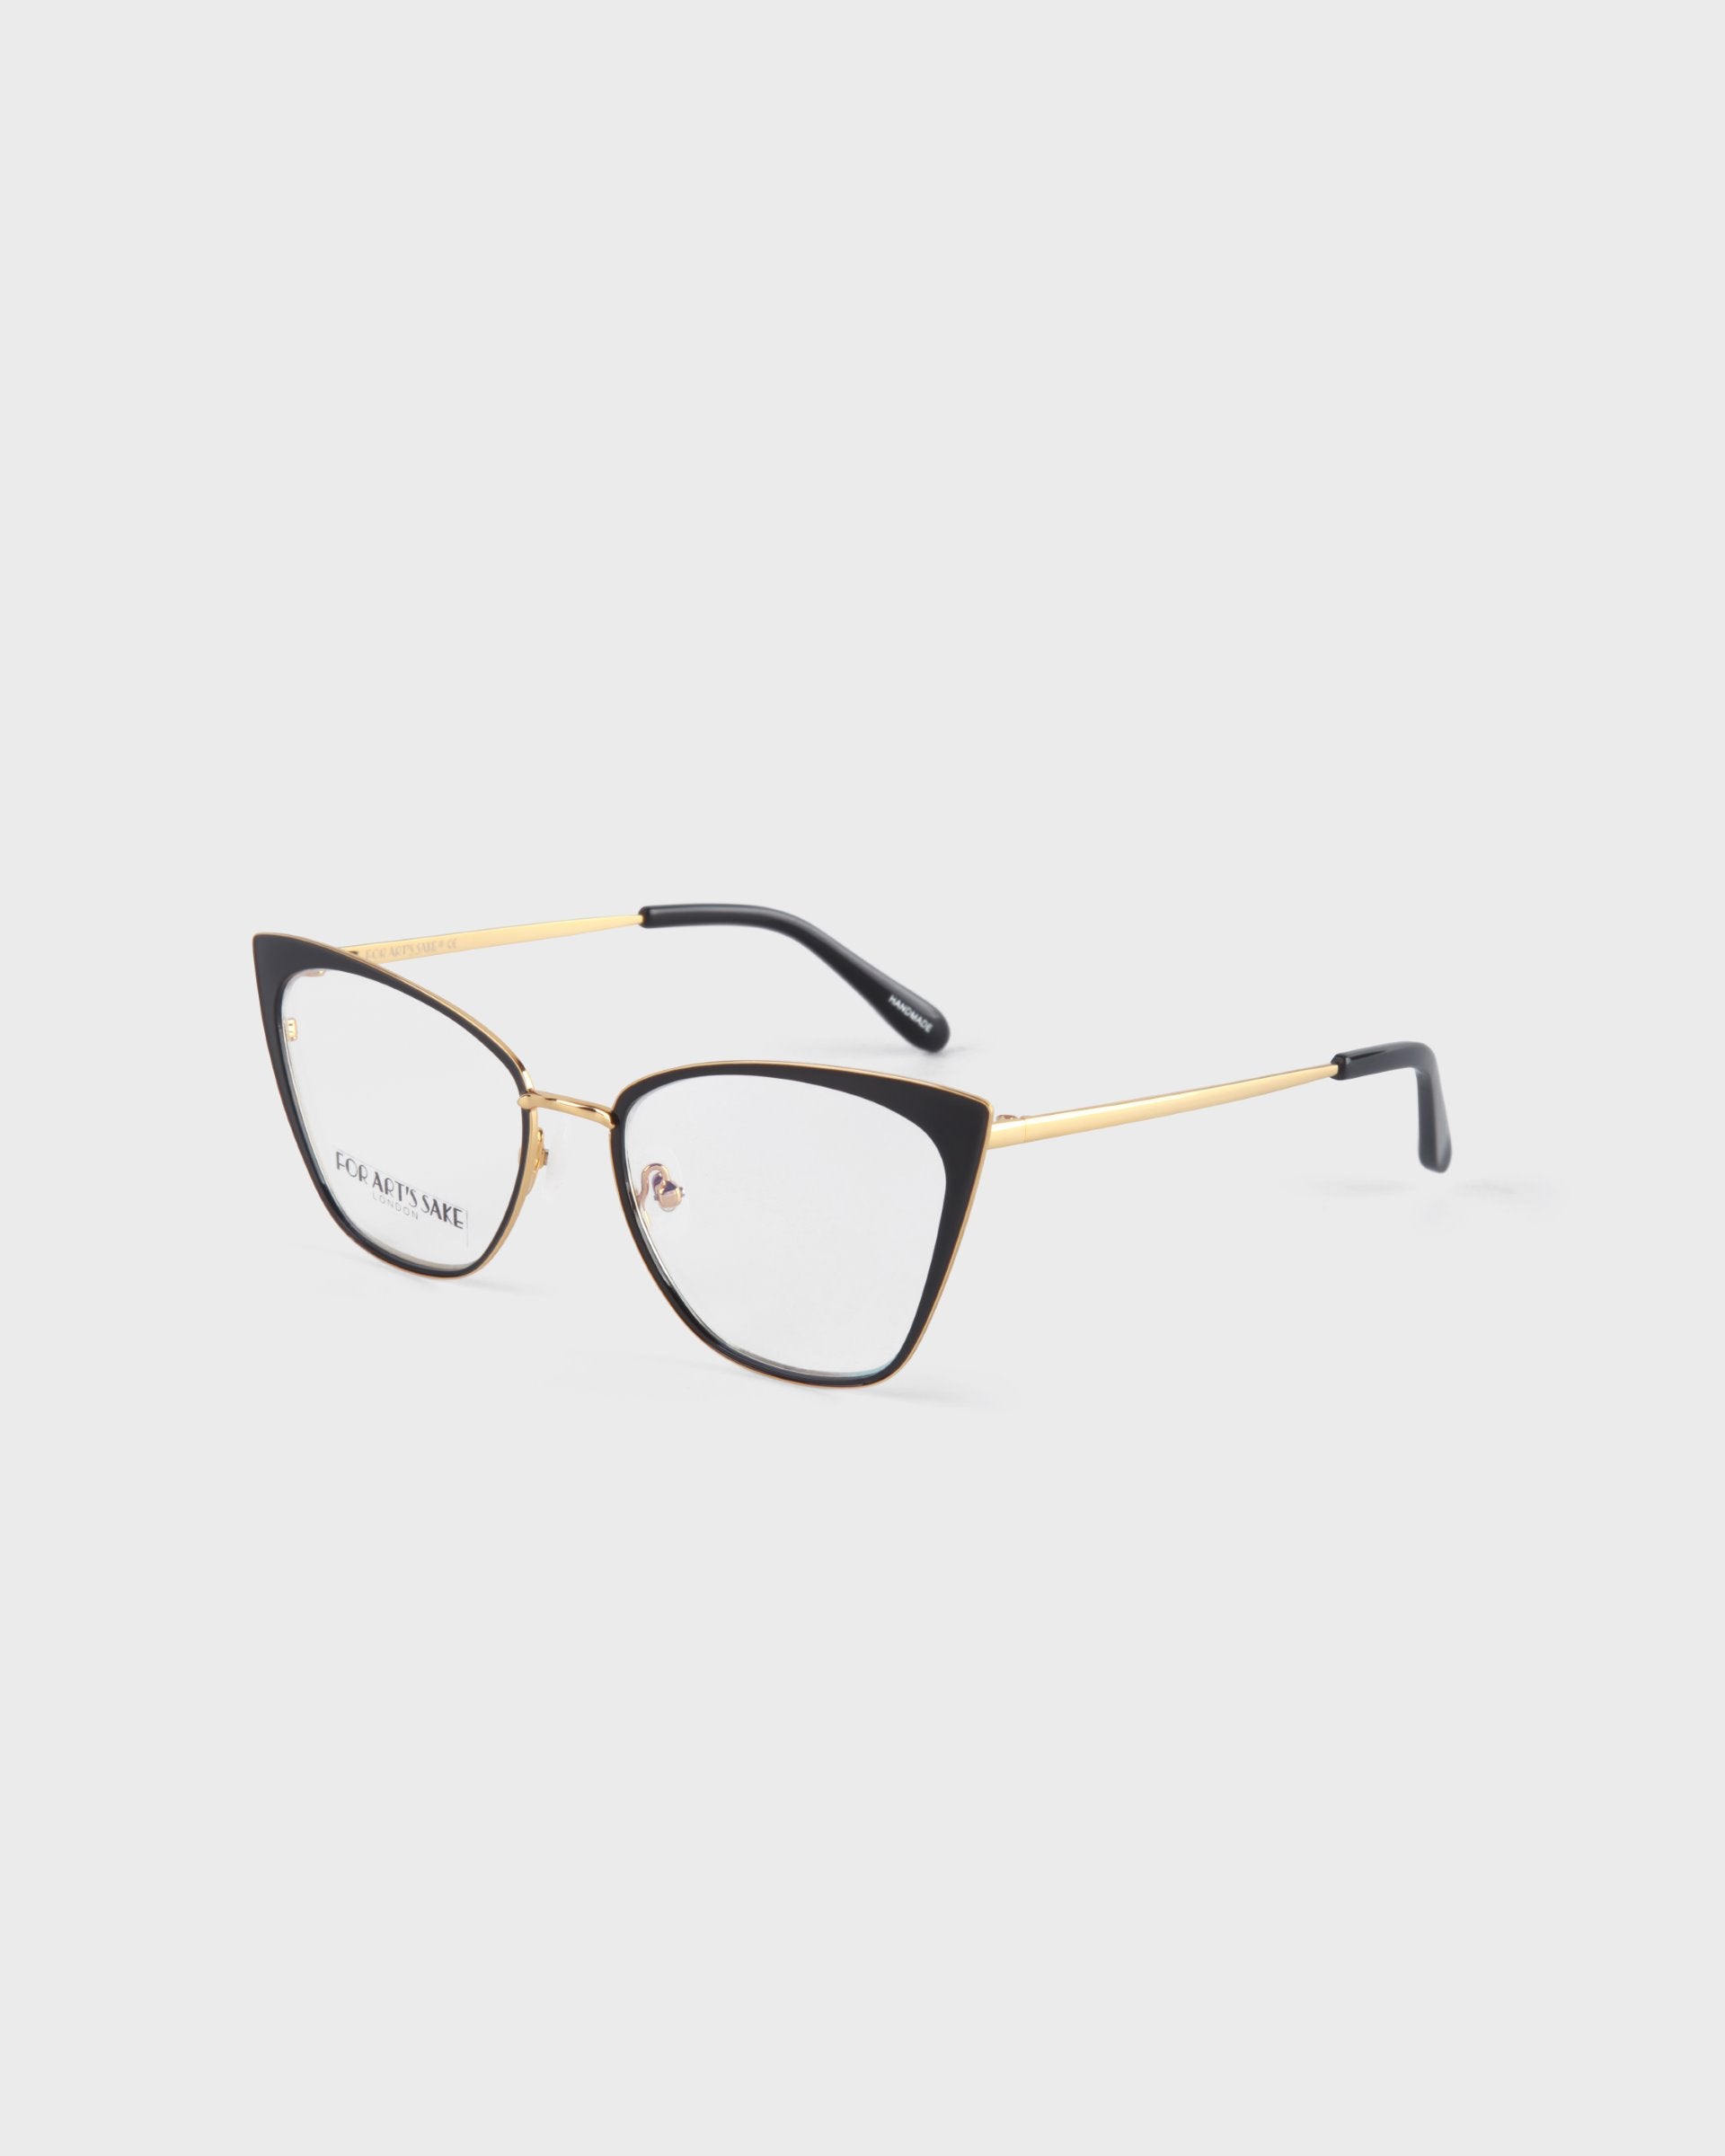 A pair of stylish Stella Two eyeglasses by For Art&#39;s Sake® with a black cat-eye frame and 14kt gold plated arms. The lenses are clear, and the tips of the arms are black. The brand name is visible on the inside of the left lens. Prescription services available. The background is white.